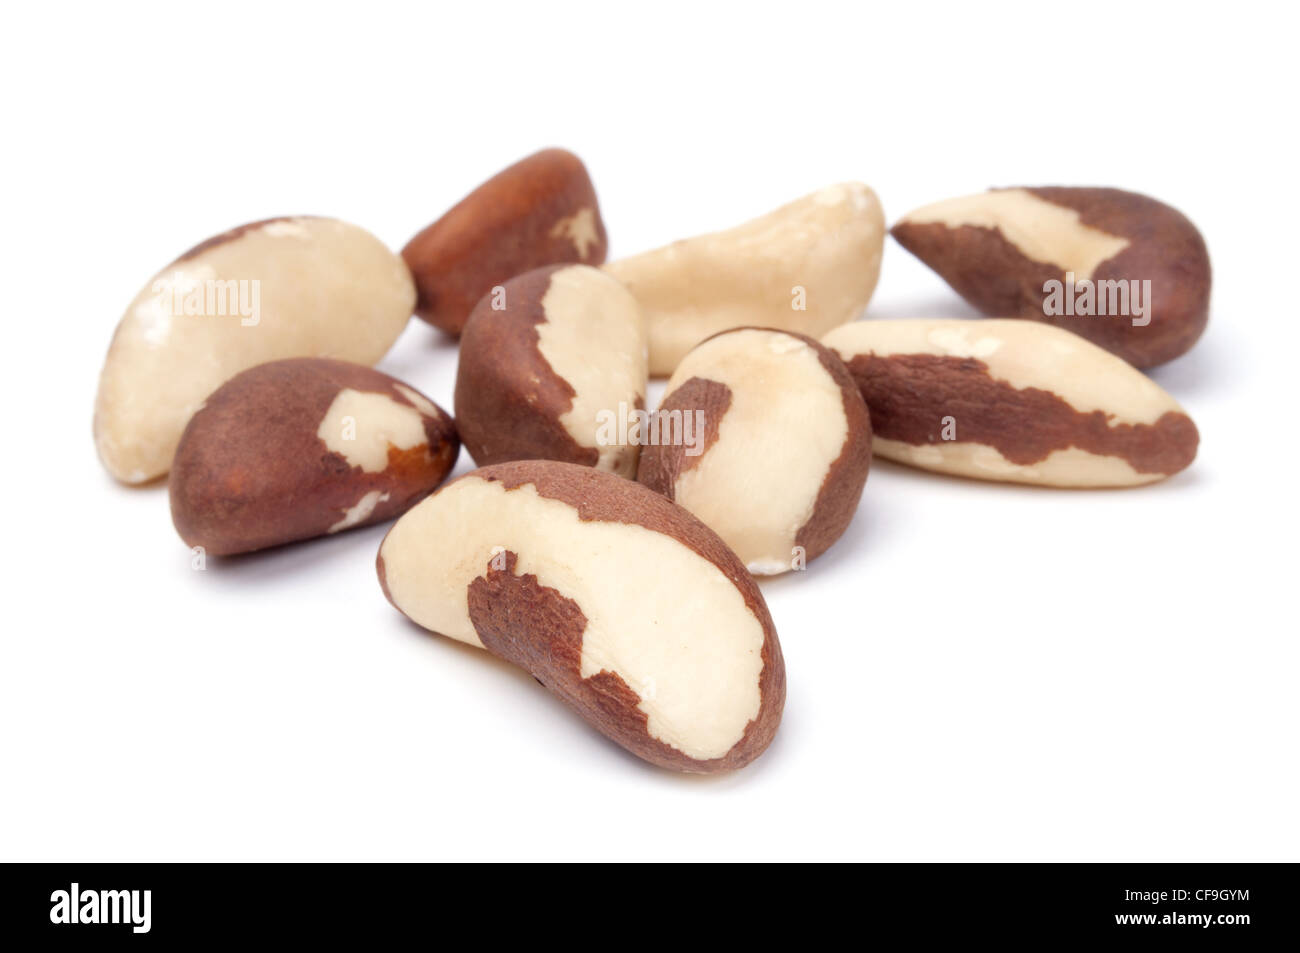 heap of brazil nuts close-up isolated on white background Stock Photo